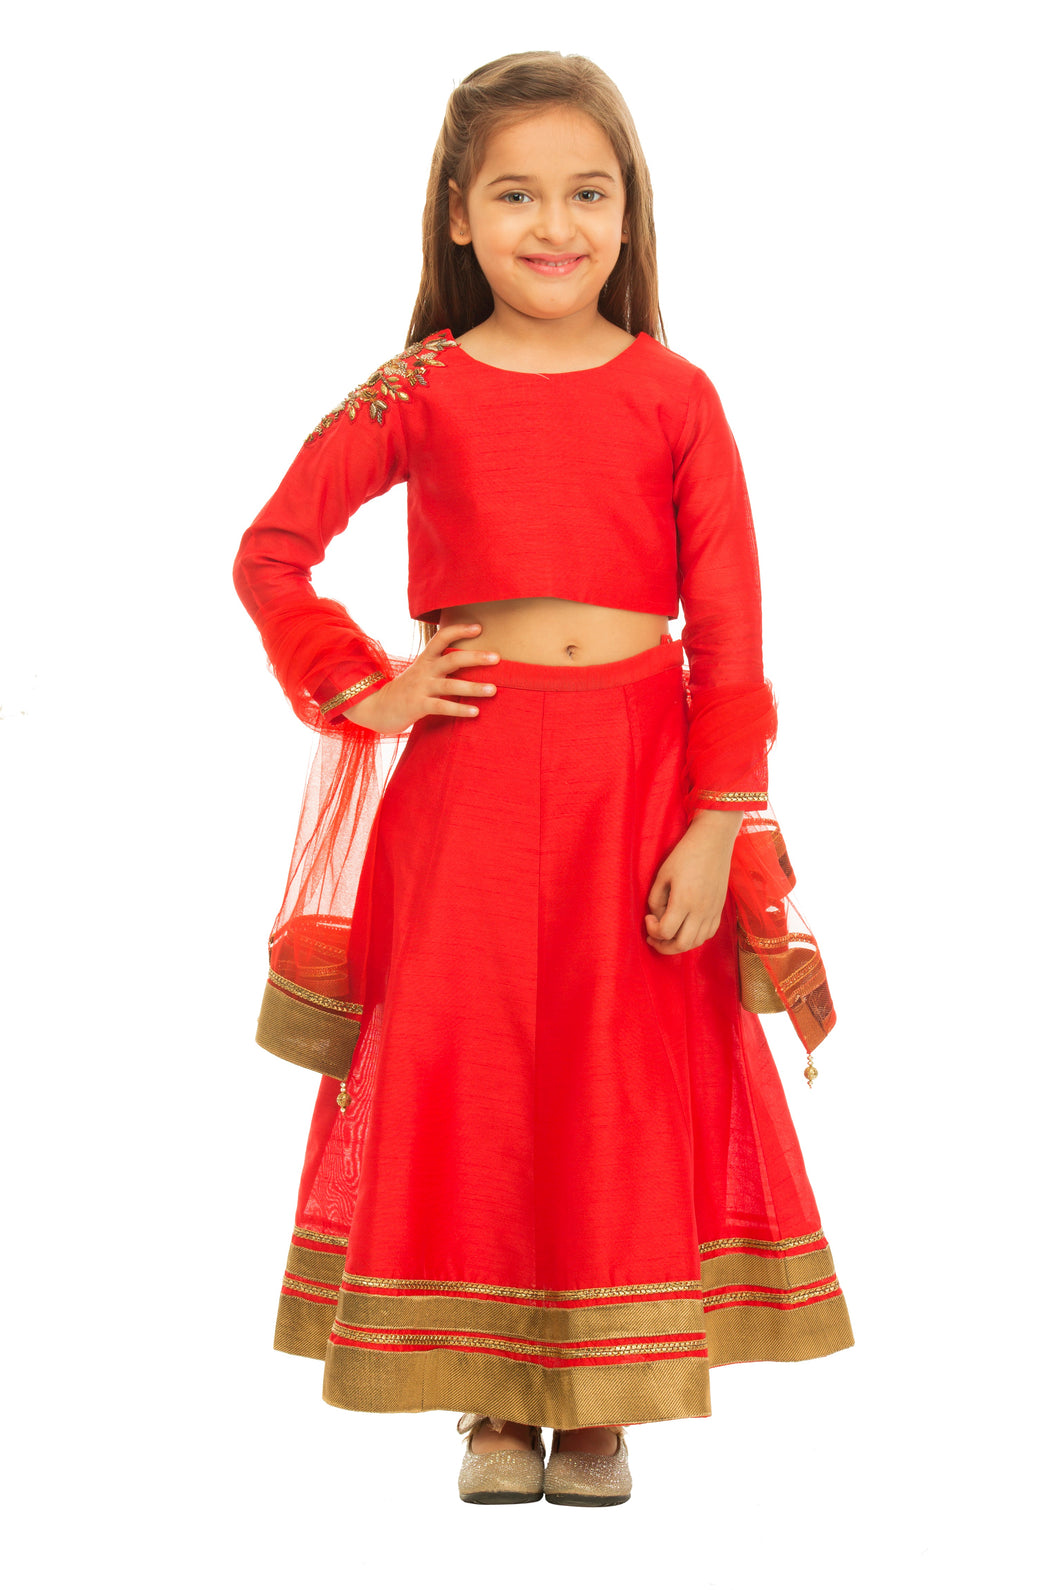 Girls Red Lehenga With Motif Placement On Shoulder